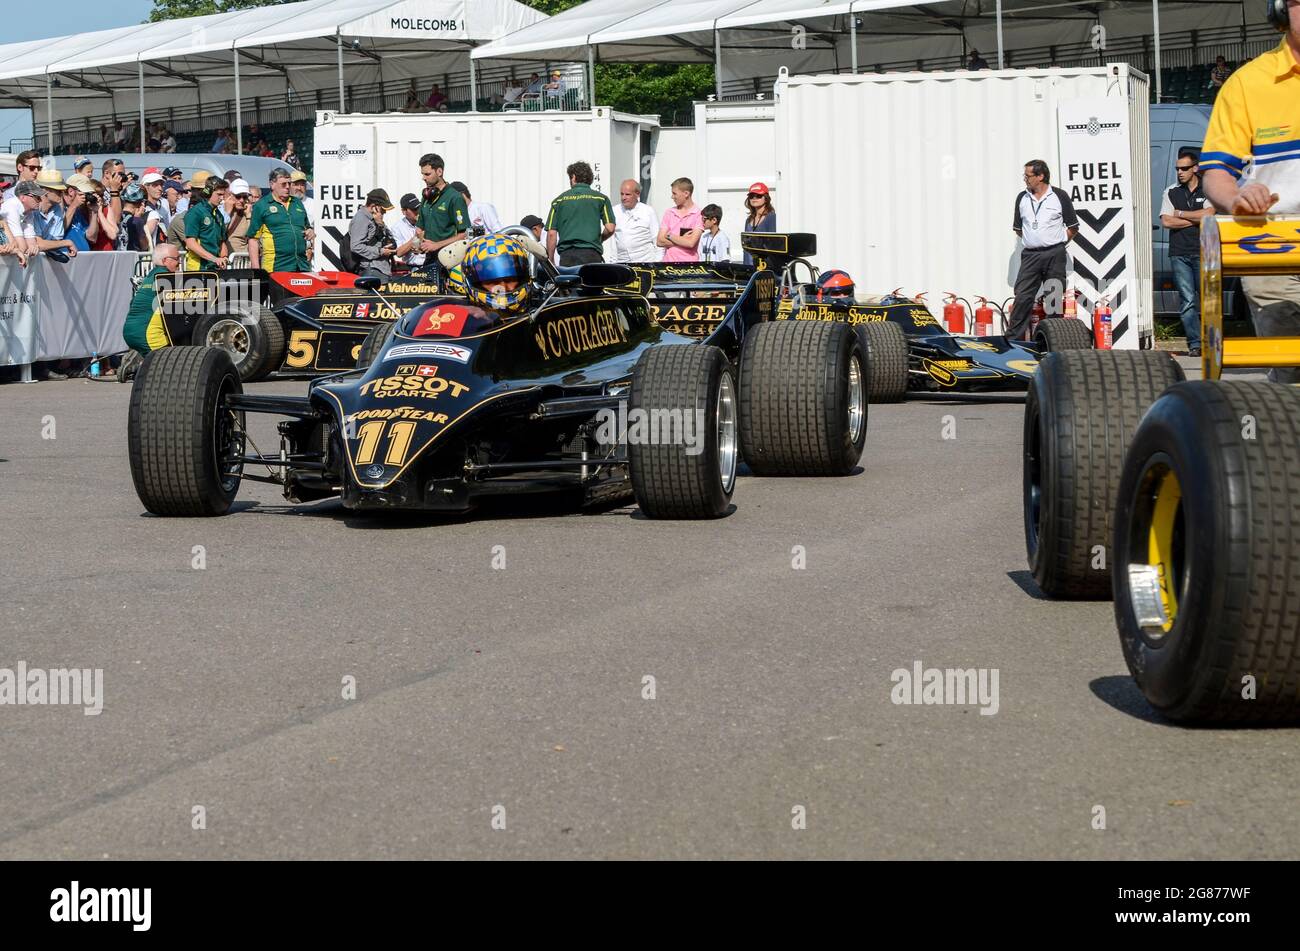 Lotus 88 at the Goodwood Festival of Speed 2013. Twin Chassis Lotus-Cosworth 88B, ground effect Formula One car of Team Essex Lotus. Driving out Stock Photo